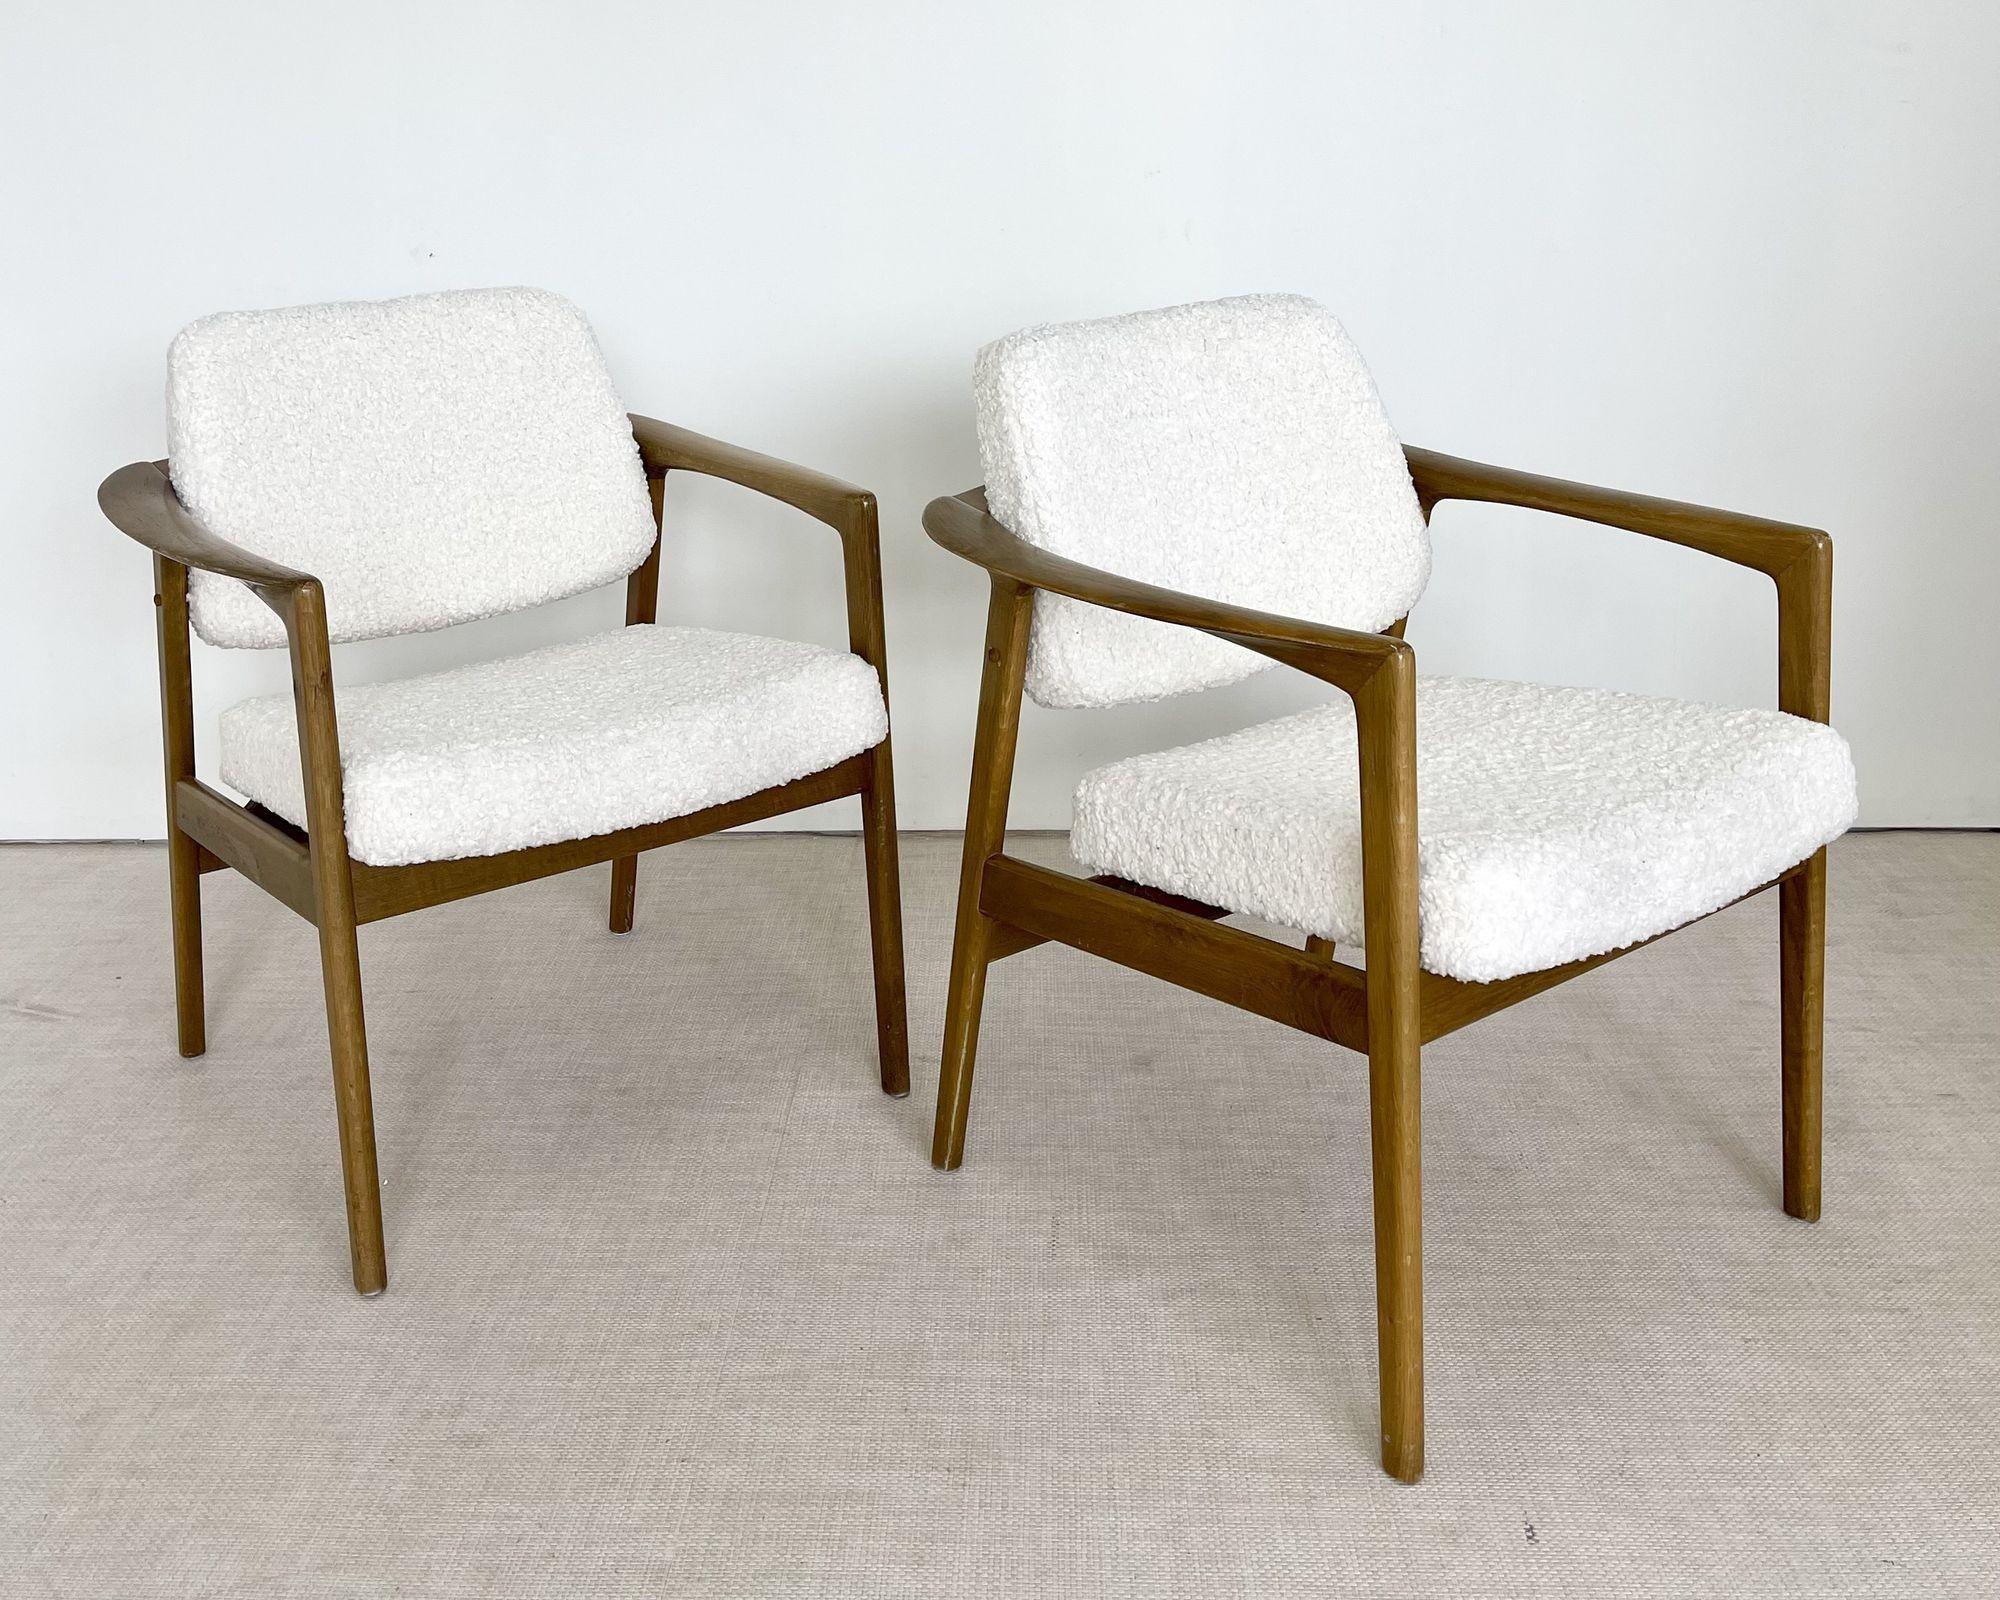 Pair of Mid-Century Modern Arm or Lounge Chairs in white shearling and oak

Modernist lounge chairs in a luxurious genuine white shearling fabric. The frames are made of solid oak and are sturdy. 

Similar to Folke Ohlsson and likely produced by